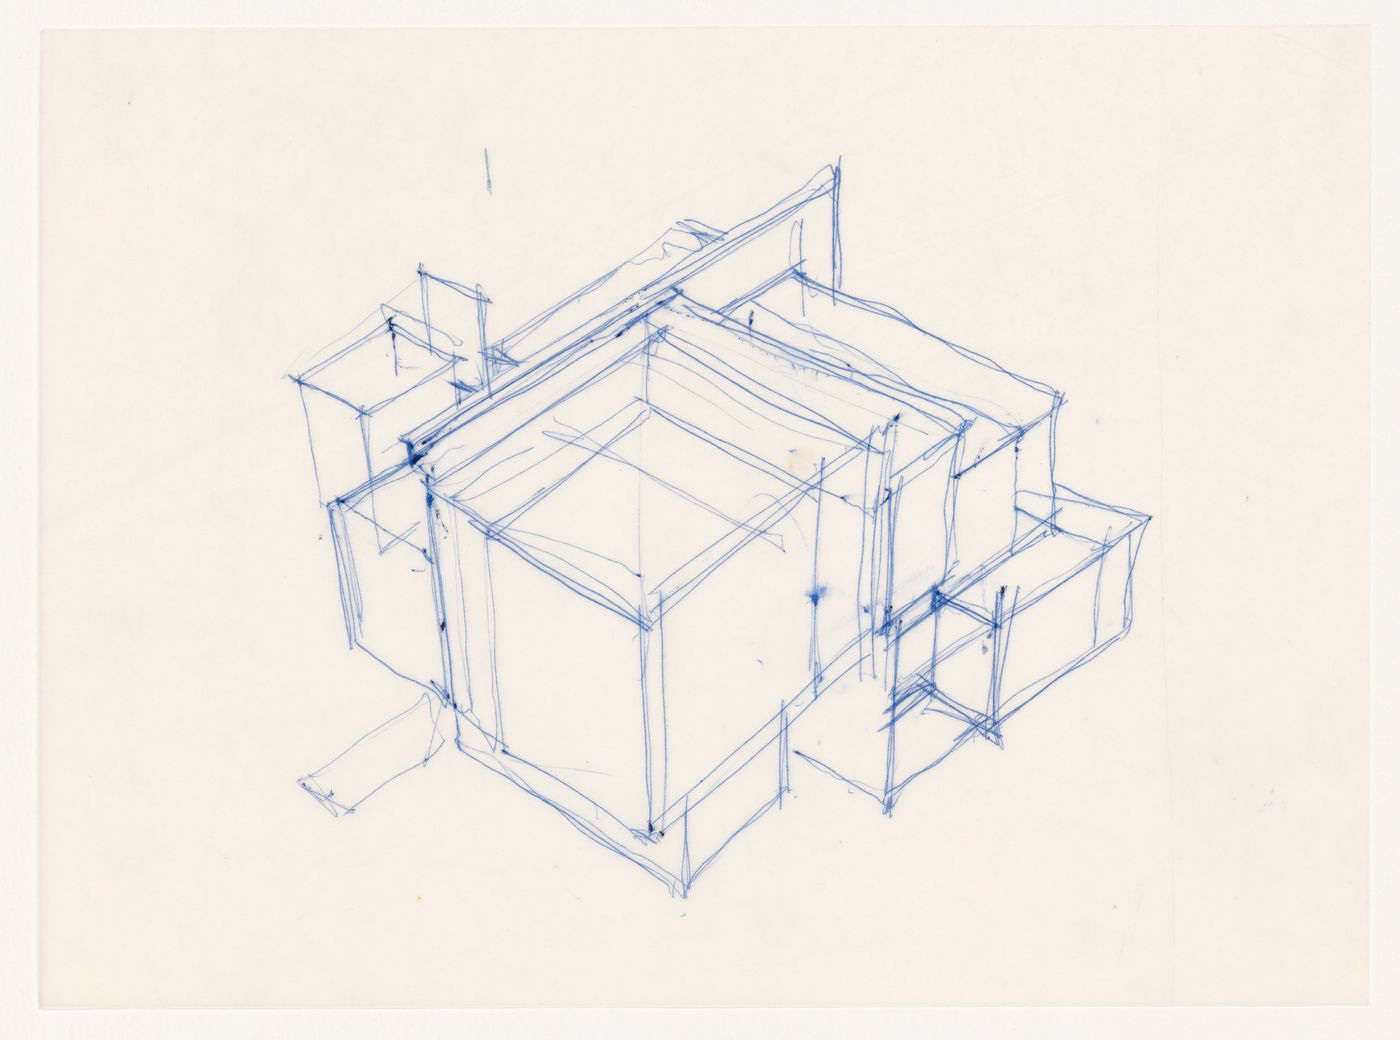 Sketch axonometric for House VI, Cornwall, Connecticut